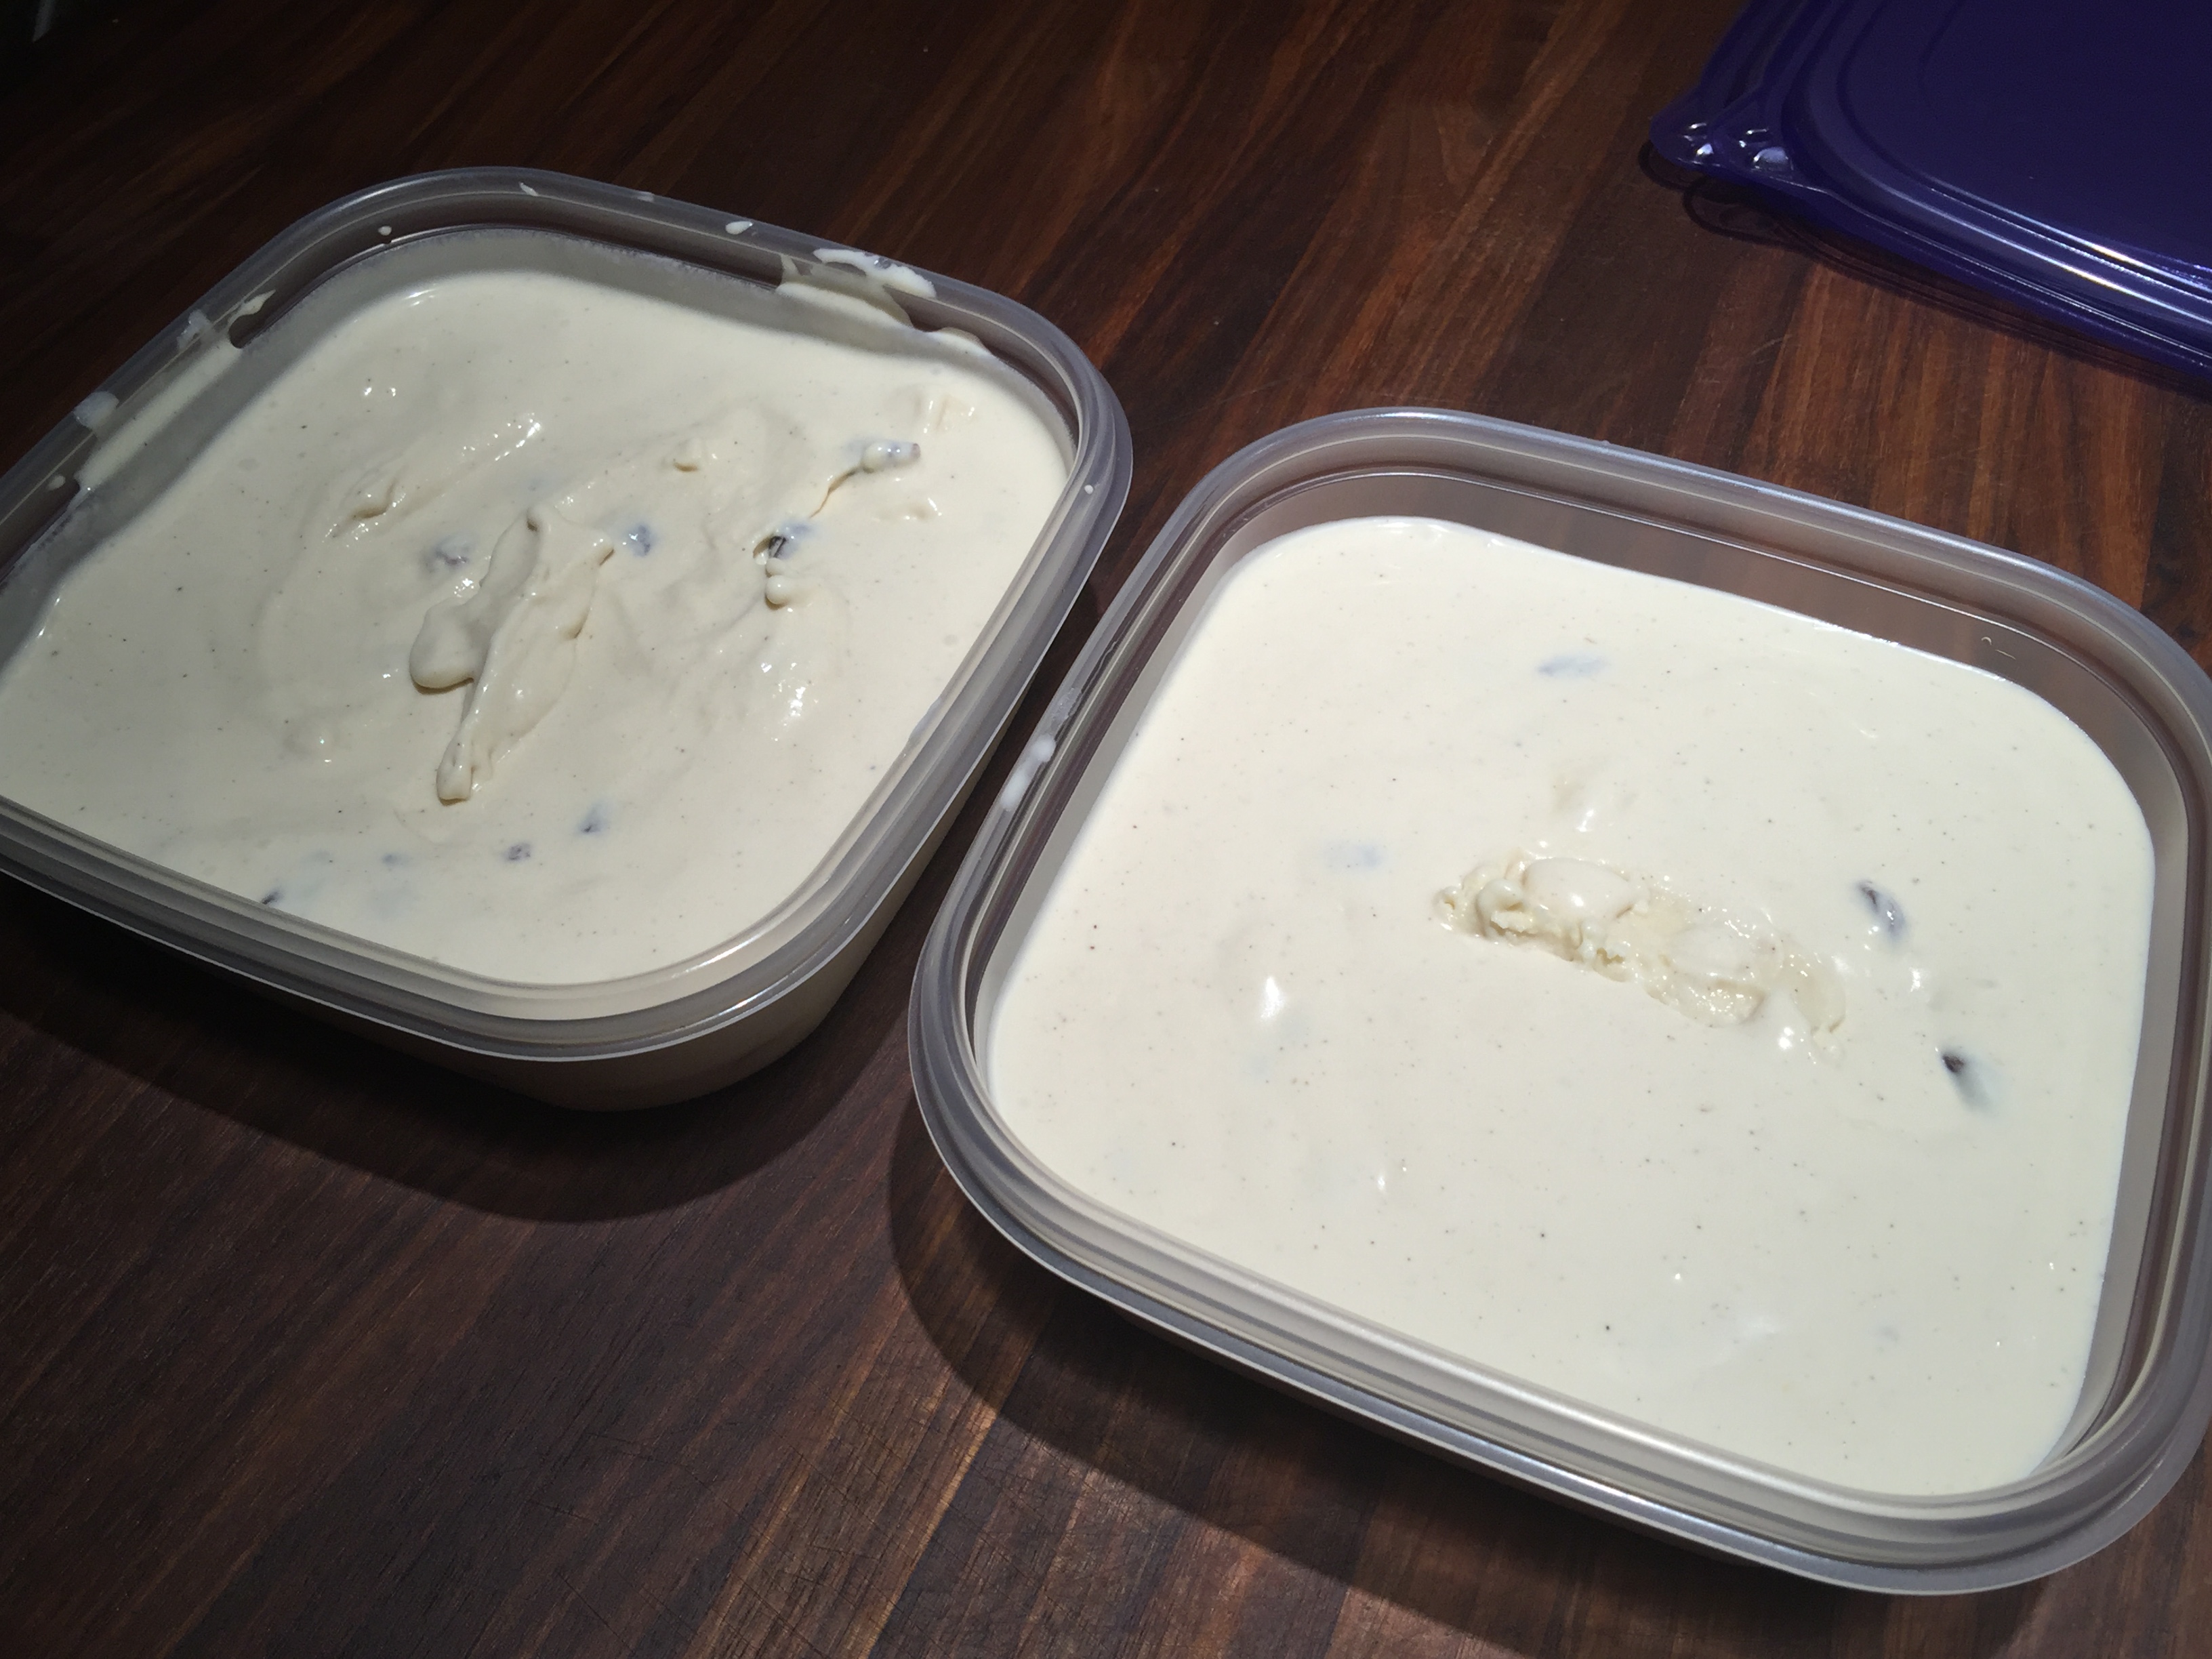 Putting the Rum Raisin Ice Cream in Air Tight Containers for 24 Hours